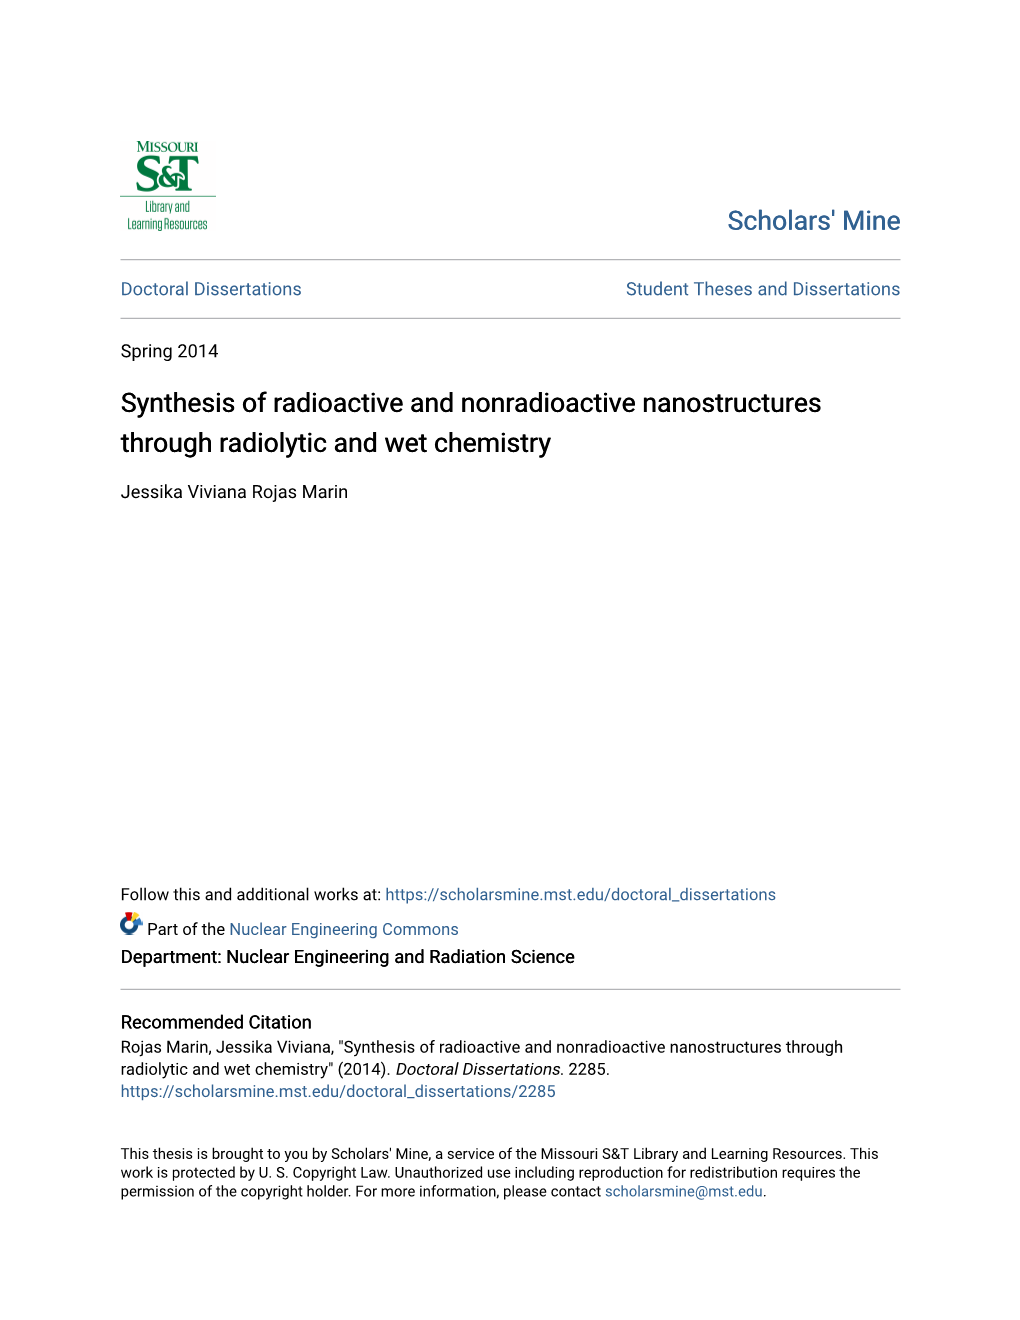 Synthesis of Radioactive and Nonradioactive Nanostructures Through Radiolytic and Wet Chemistry